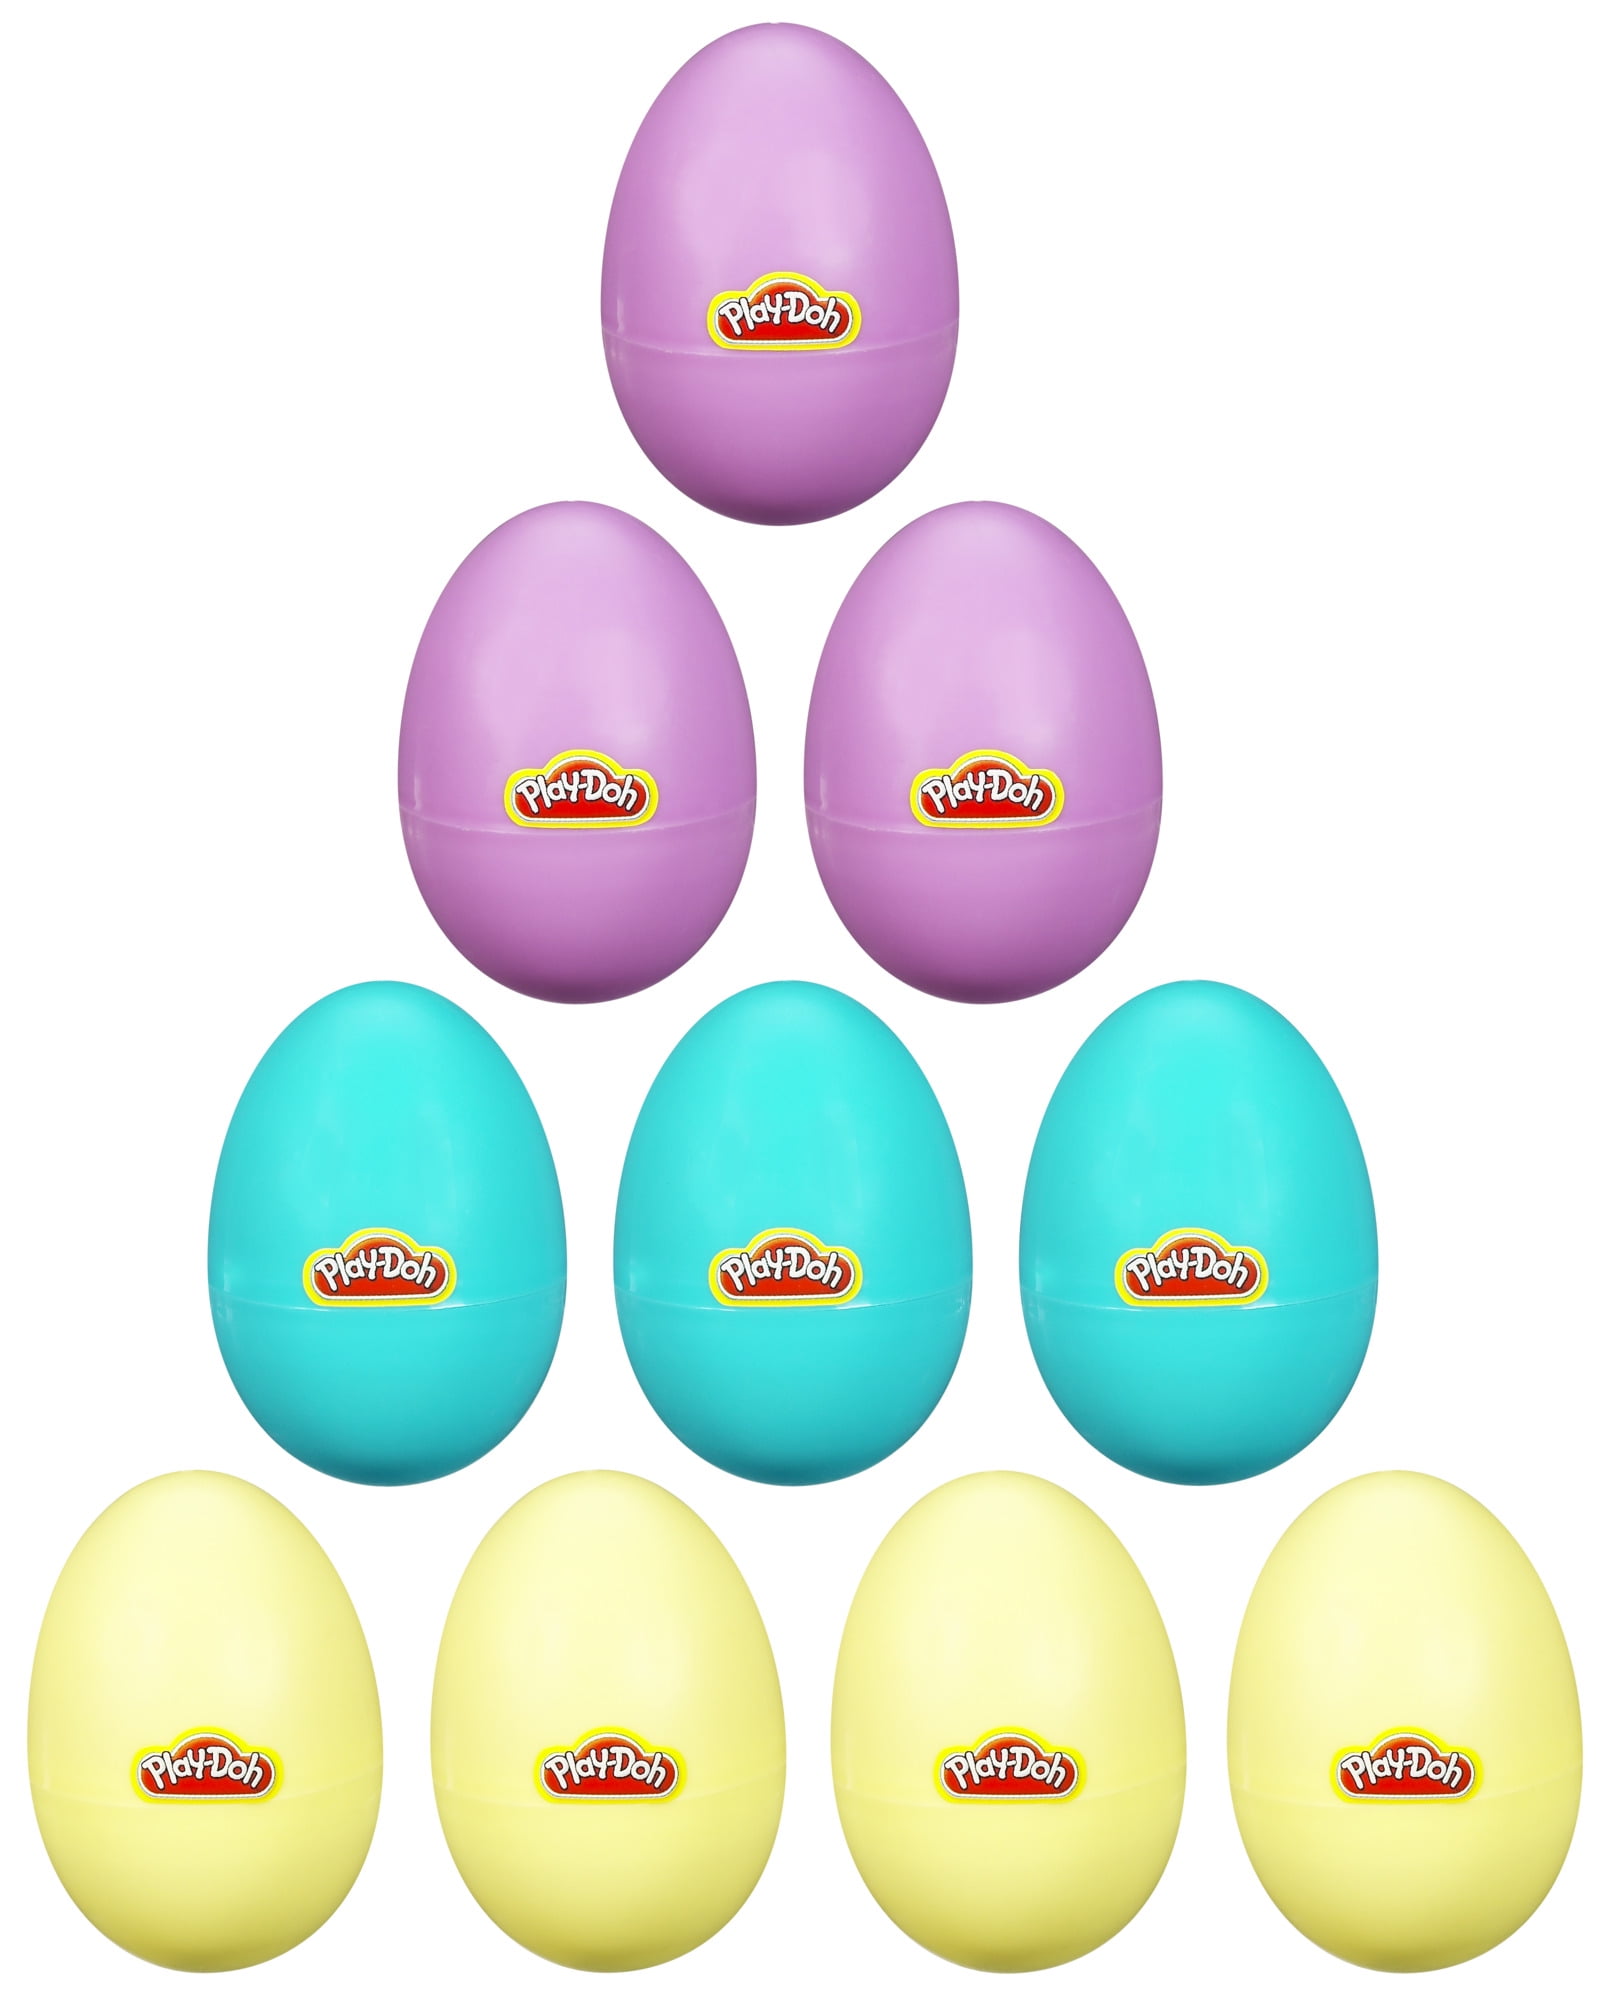 Play-Doh Easter Eggs spring eggs 4 pack by Hasbro-Great for Kids